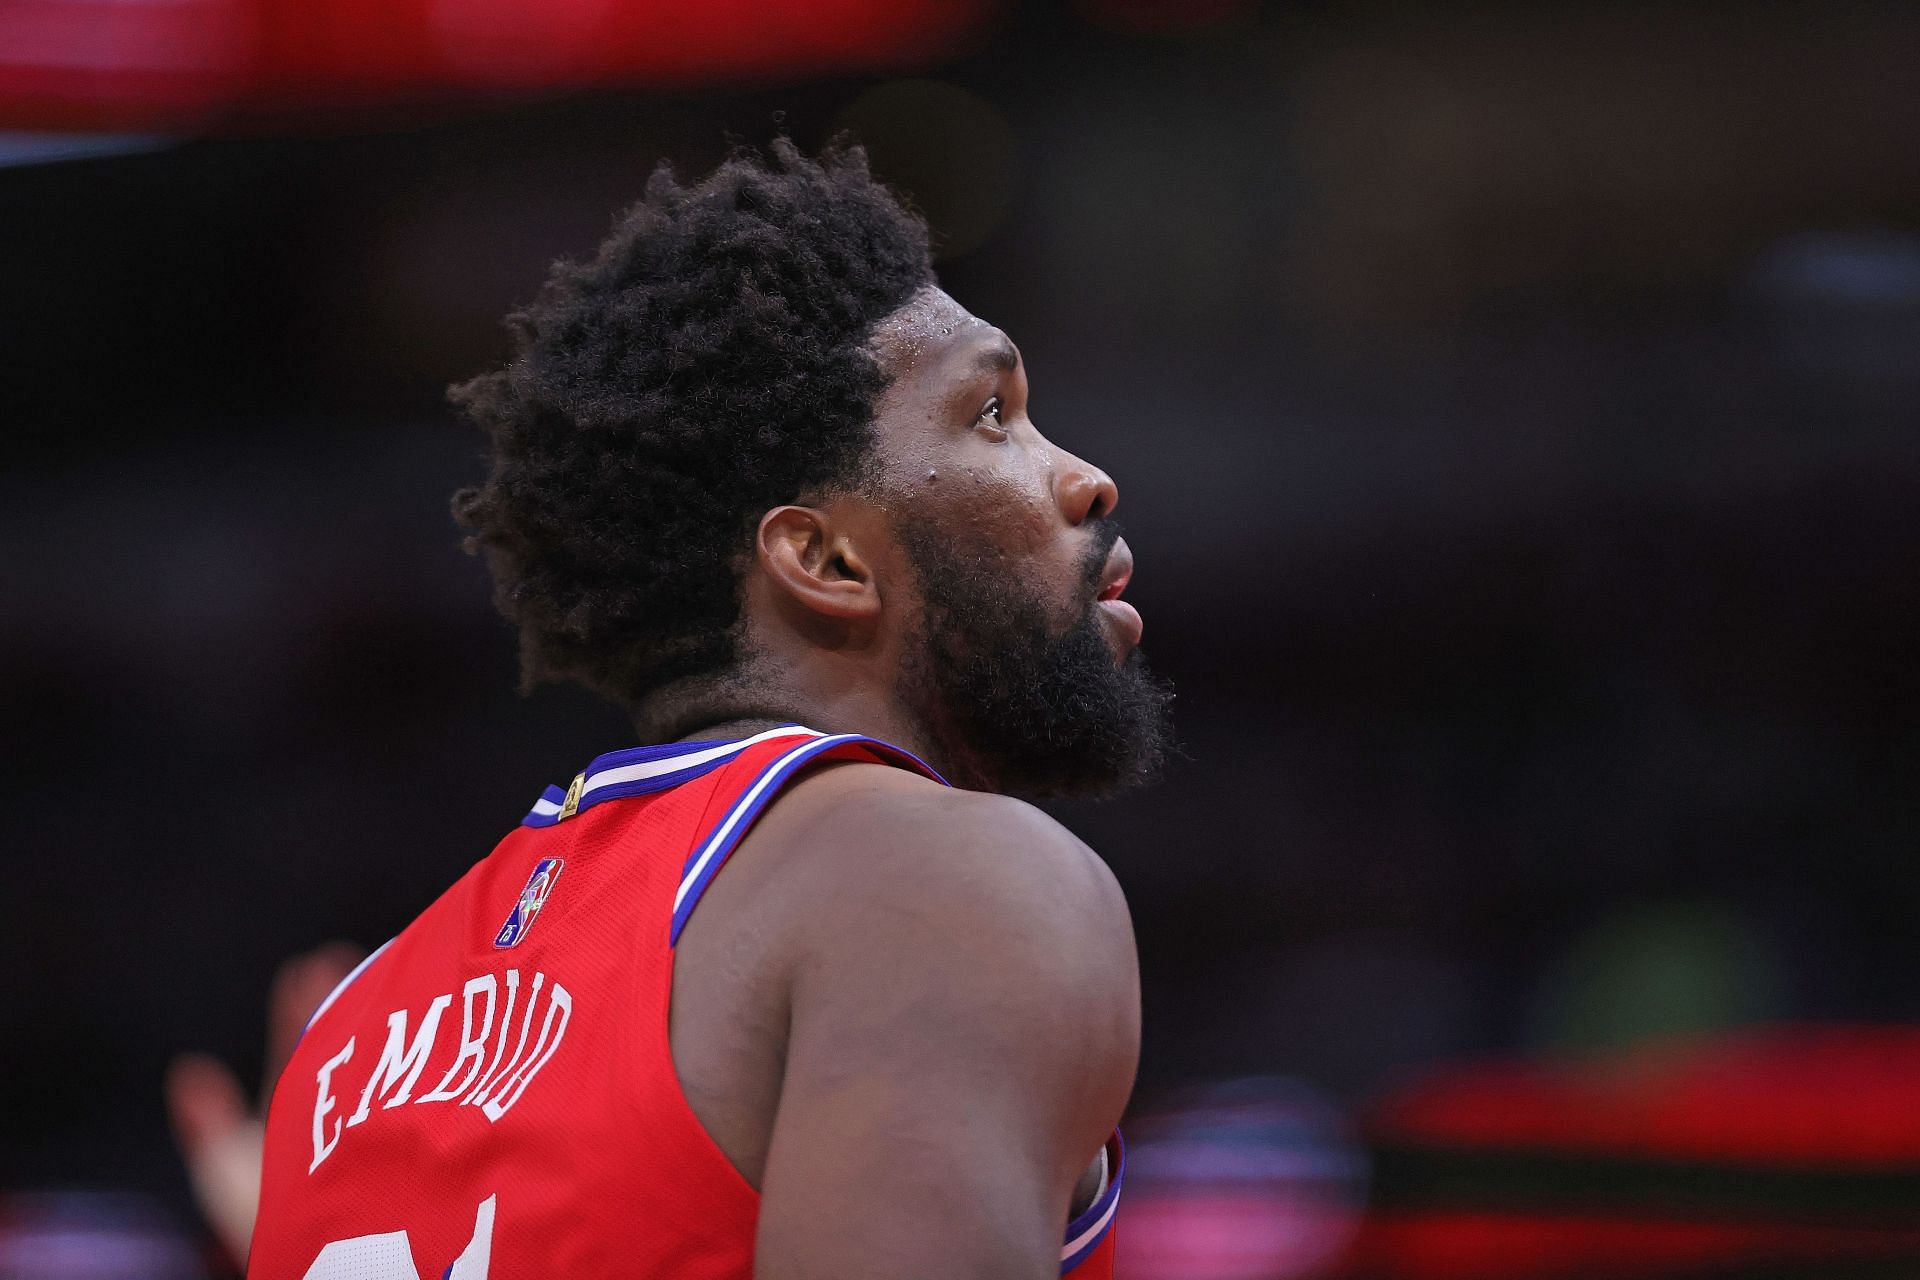 Joel Embiid #21 of the Philadelphia 76ers watches the ball during a Chicago Bulls free throw at the United Center on November 06, 2021, in Chicago, Illinois. The 76ers defeated the Bulls 114-105.